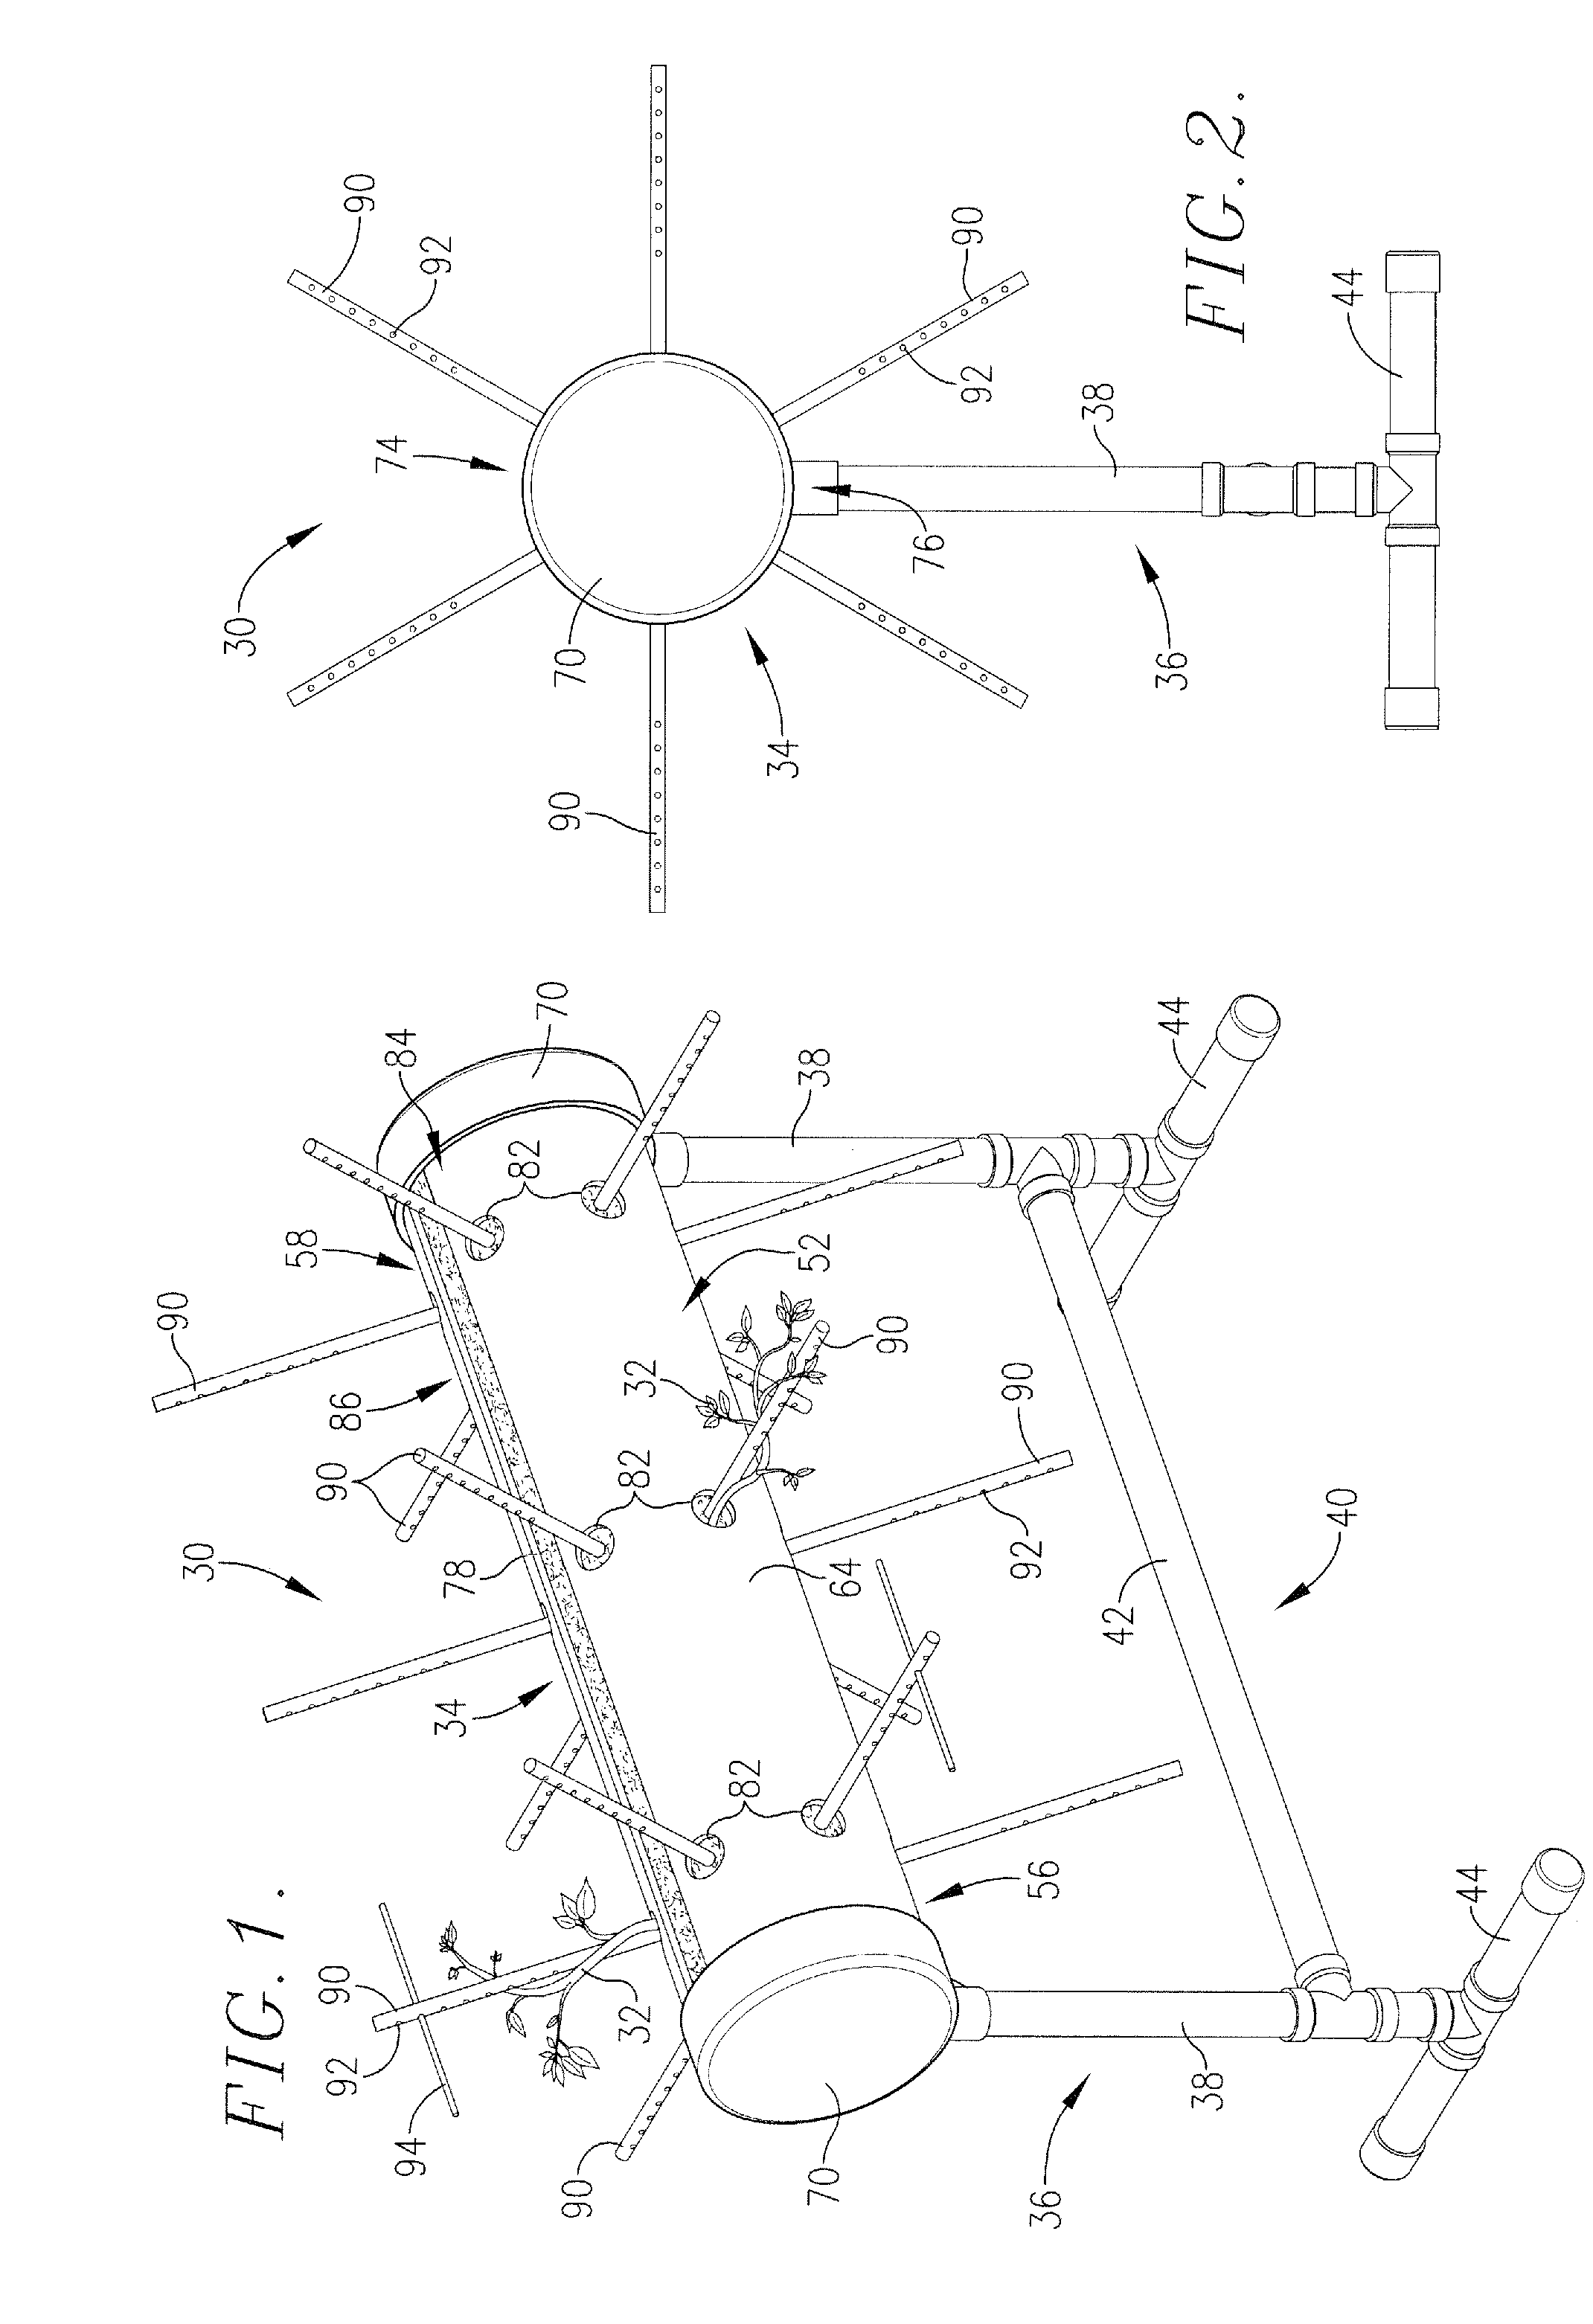 Method and apparatus for growing plants